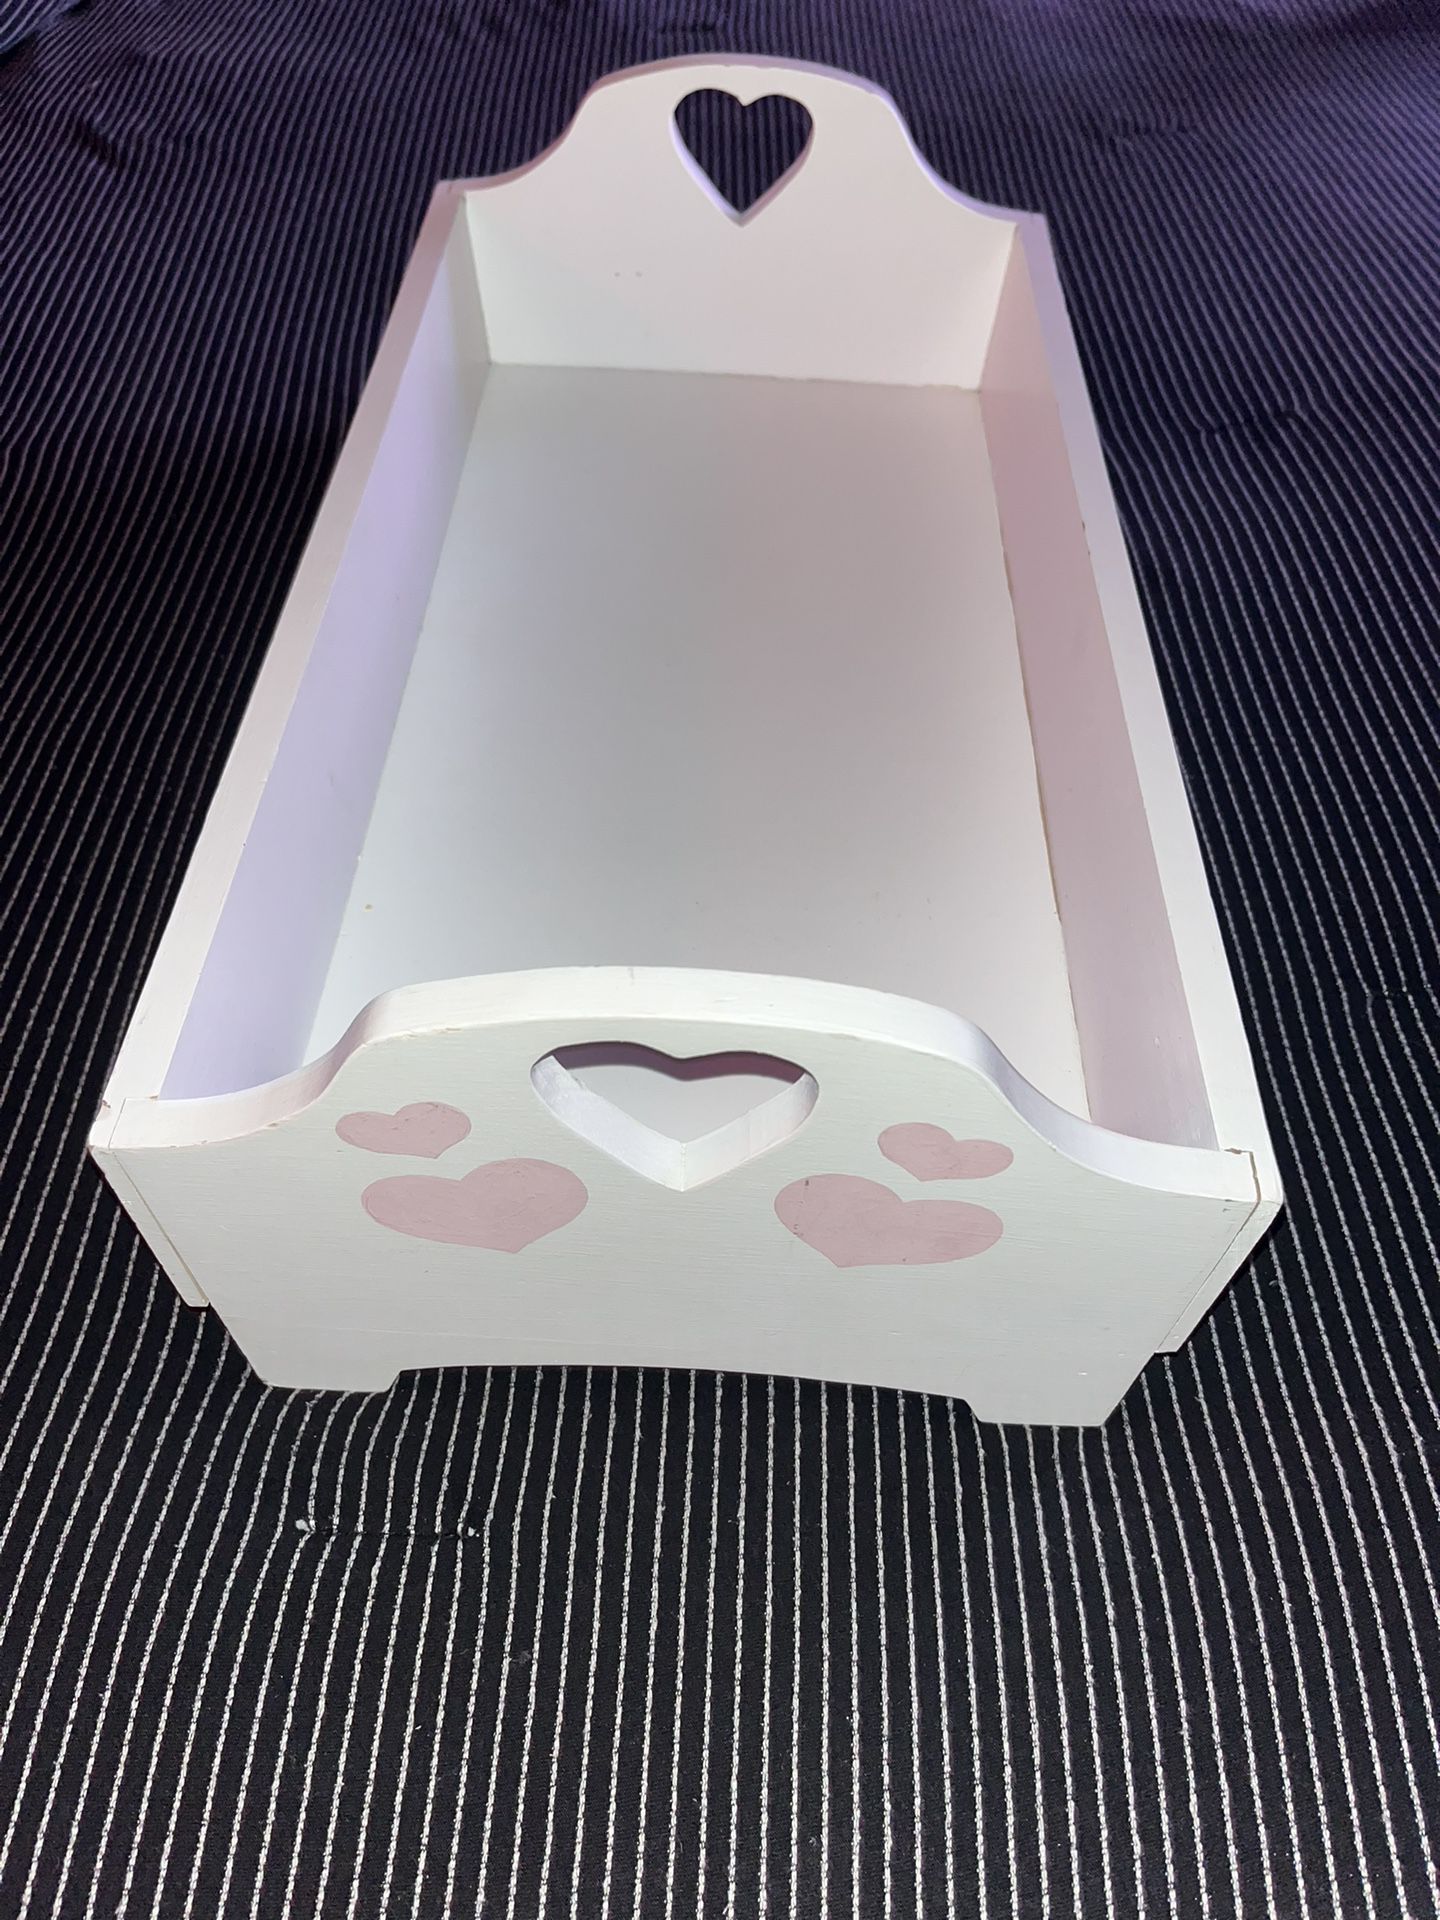 Vintage Doll Bed, White with Pink Hearts on Ends! 20 Inches Length by a bit over 10.5 Inches Wide.